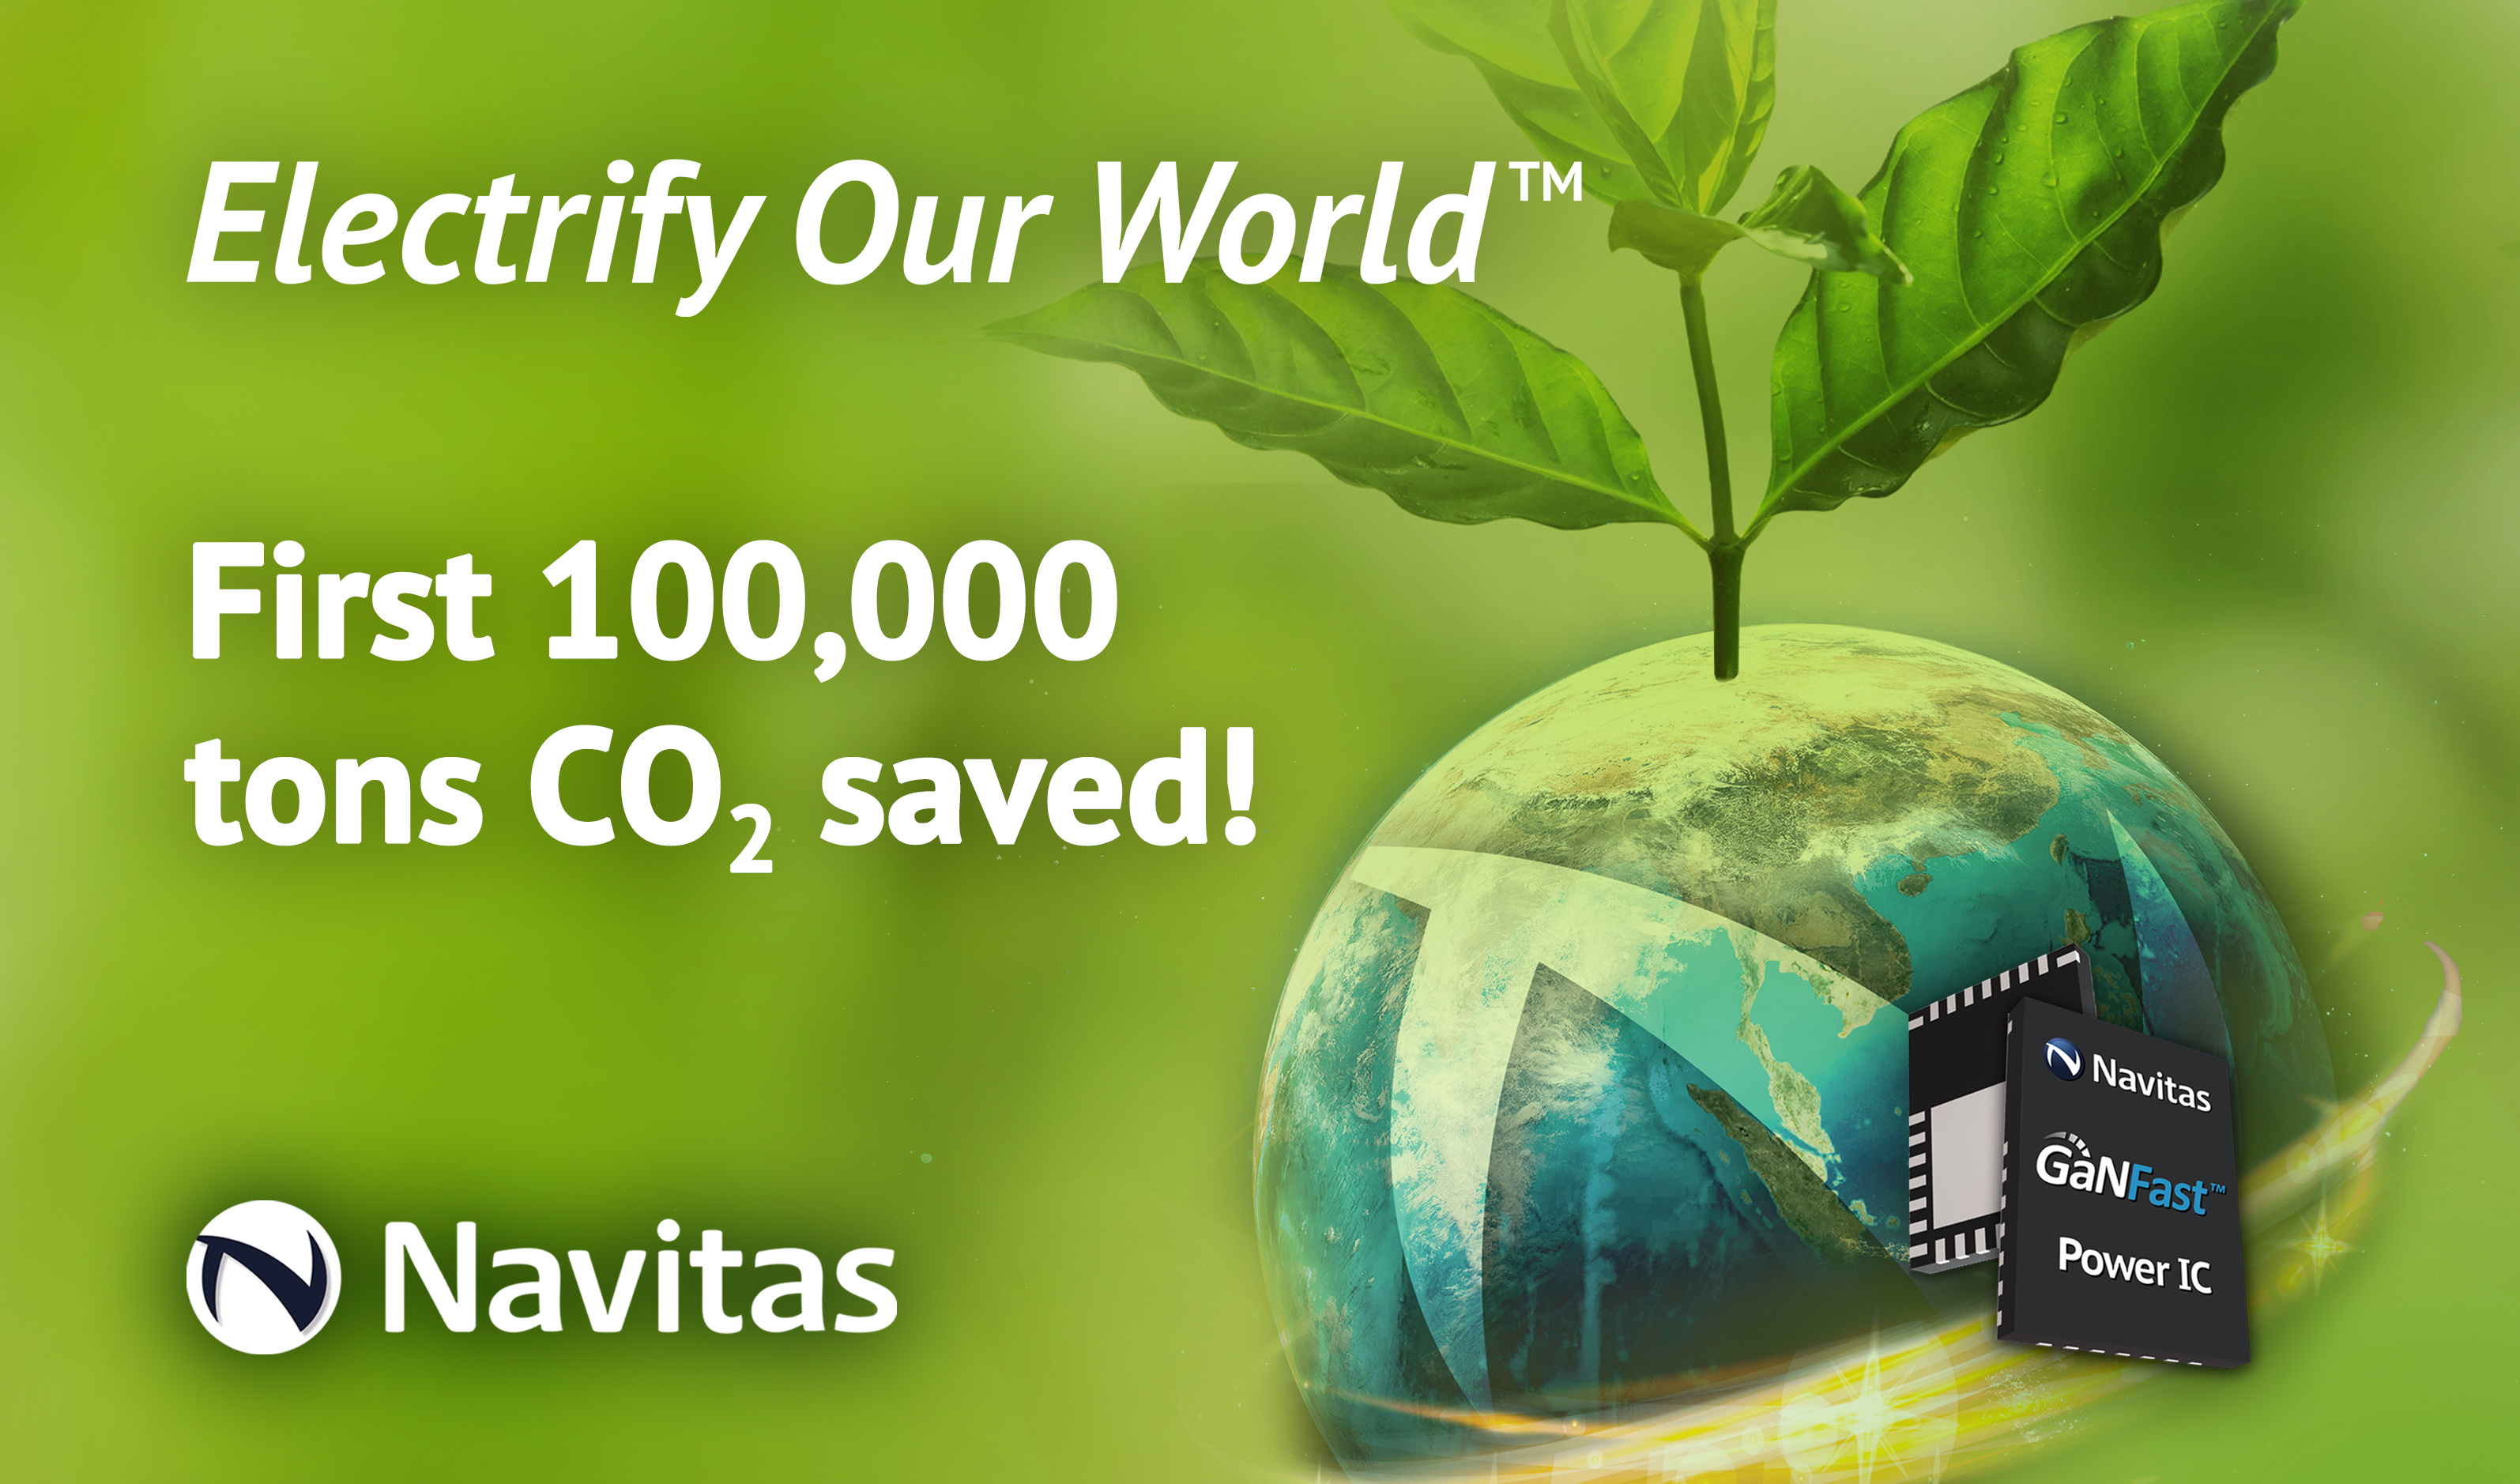 Navitas GaN ICs Save First 100,000 Tons of CO2 Emissions